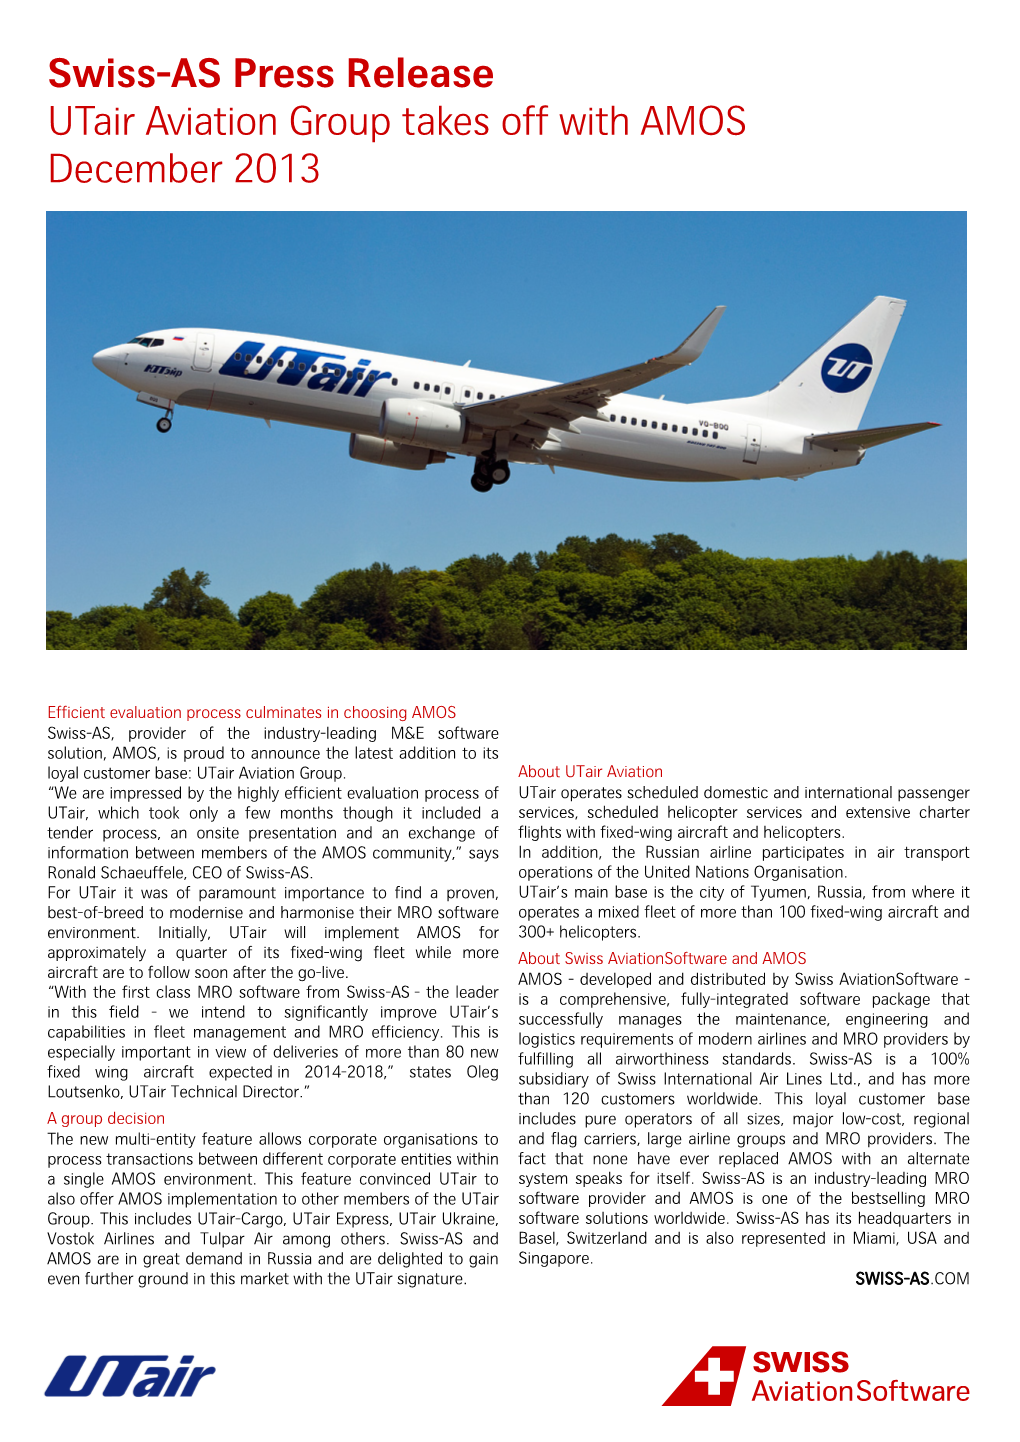 Swiss-AS Press Release Utair Aviation Group Takes Off with AMOS December 2013